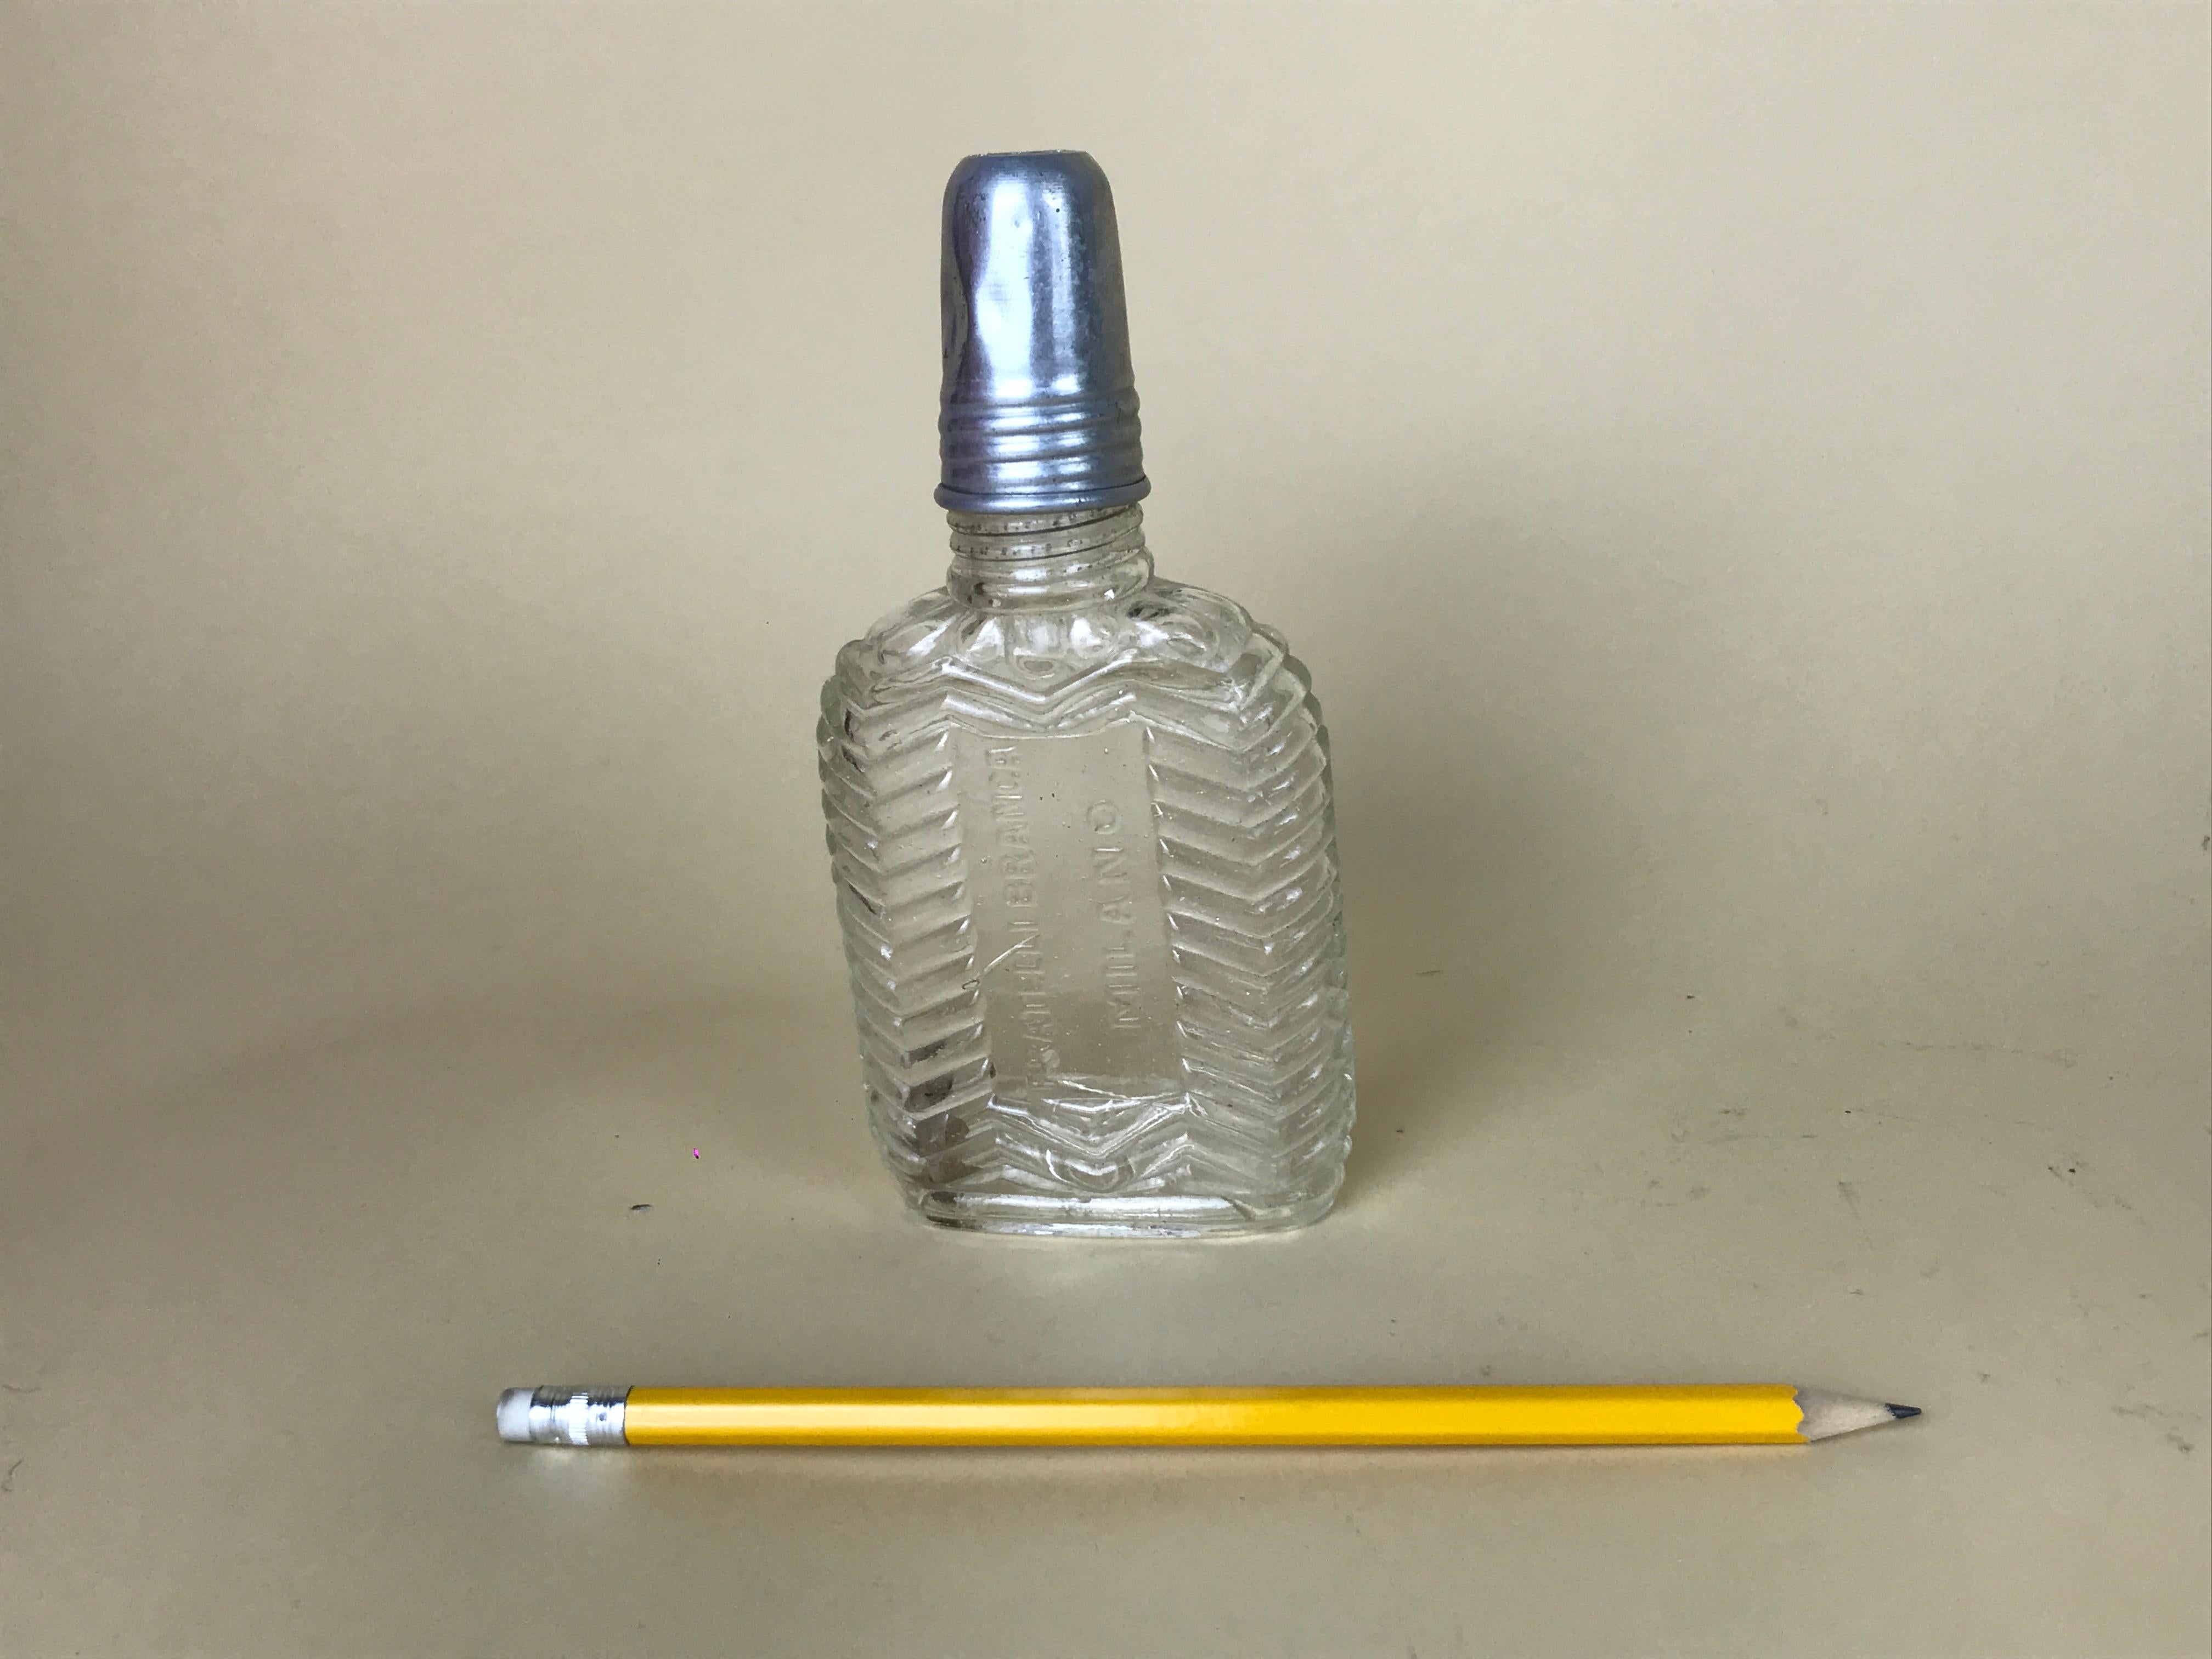 This vintage Fratelli Branca Milano glass flask with a separate small aluminium cup is totally iconic!

Flask is made in glass with a herringbone pattern in relief and marked 